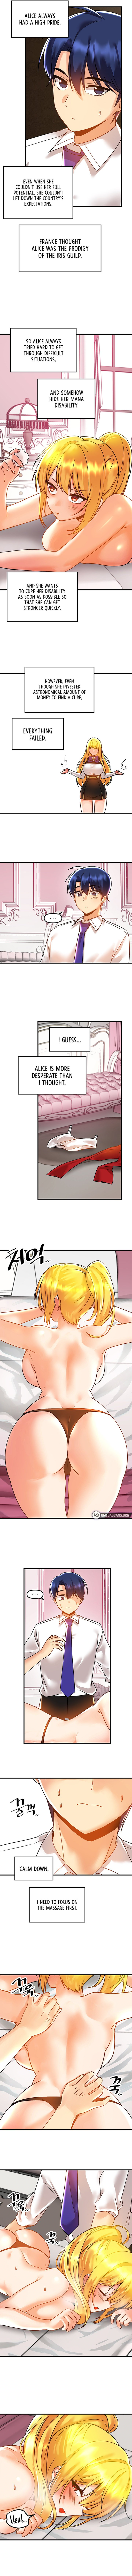 trapped-in-the-academys-eroge-chap-47-4